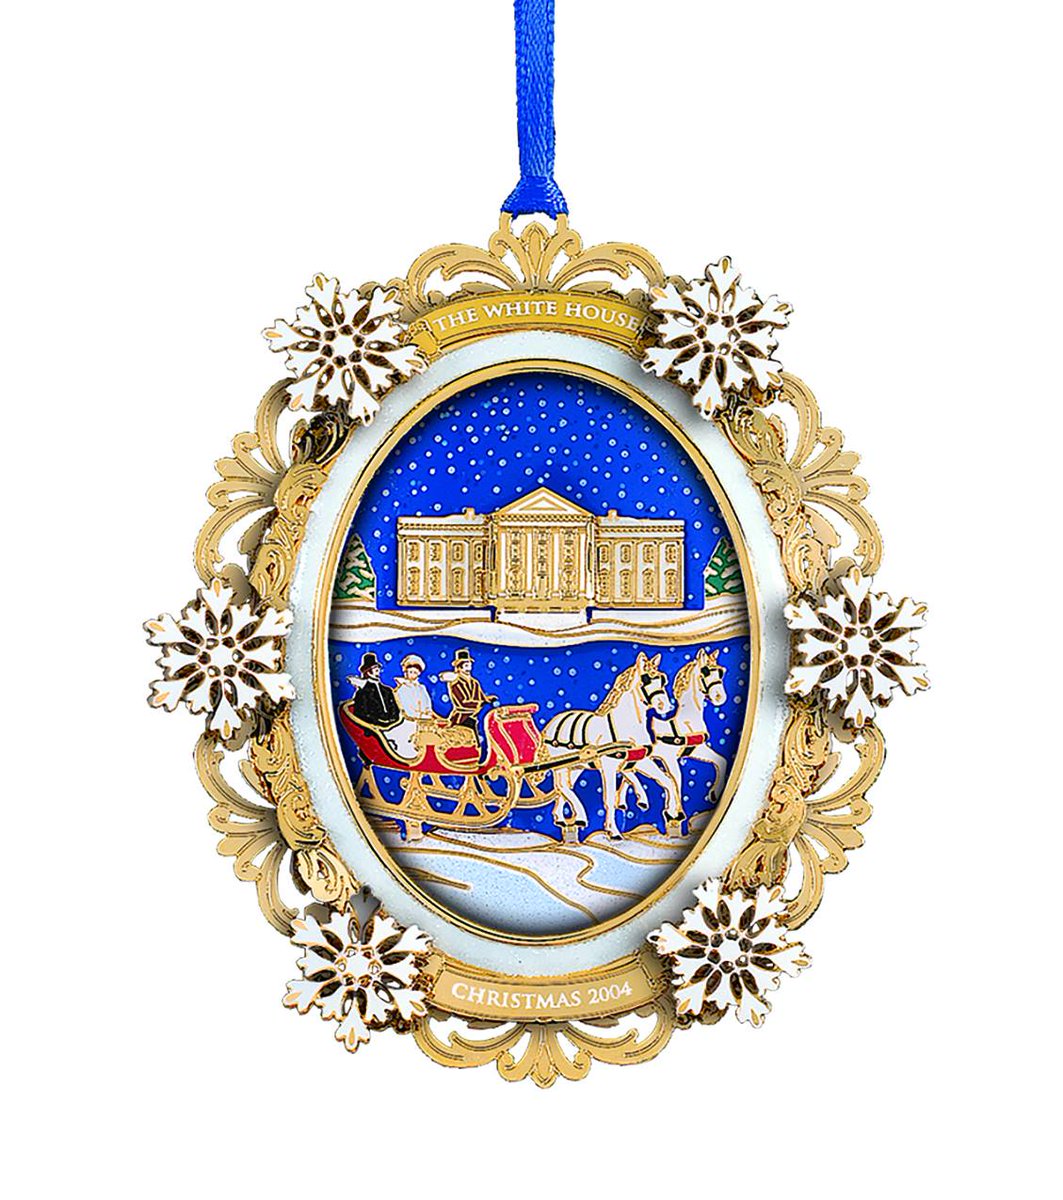 The 2004 official White House Christmas Ornament celebrates the administration of Rutherford Hayes and commemorates his love of winter weather. Hayes enjoyed taking his family and guests on sleigh rides around Washington.Buy yours:  https://shop.whitehousehistory.org/holidays/ornaments/2004-white-house-christmas-ornament-a-first-familys-sleigh-ride